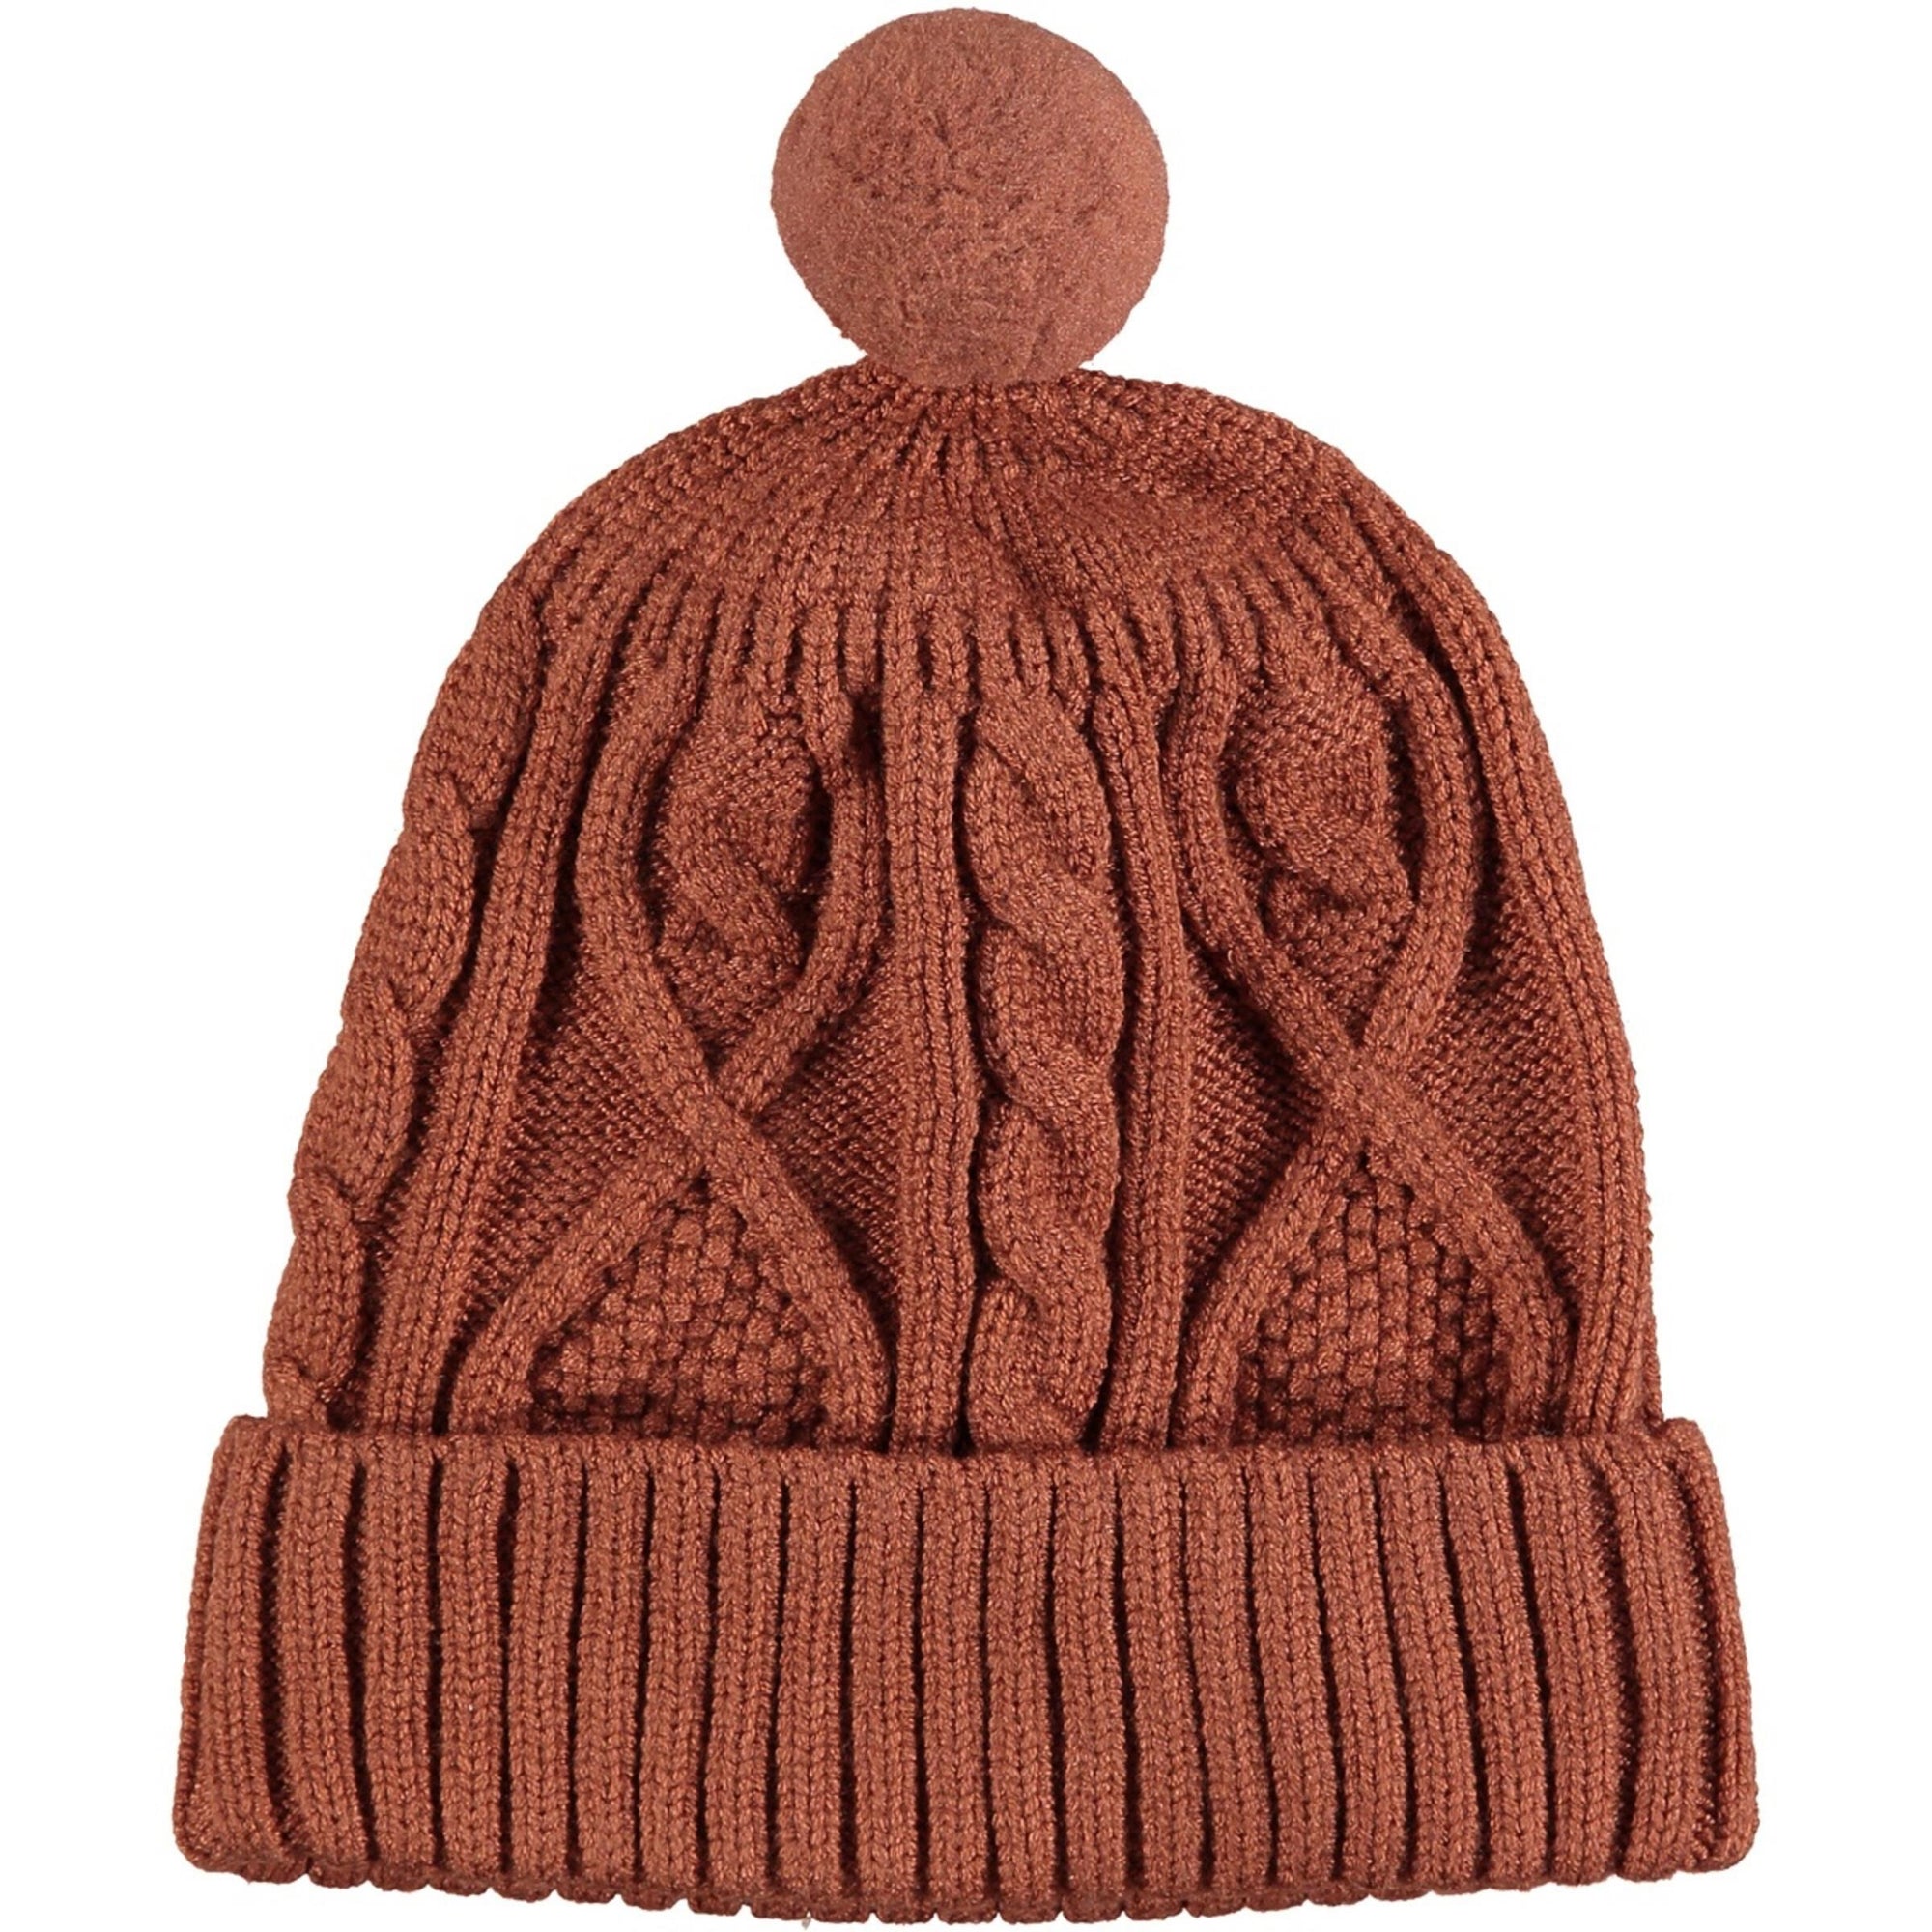 Vignette Maddy Knit Hat / Rust